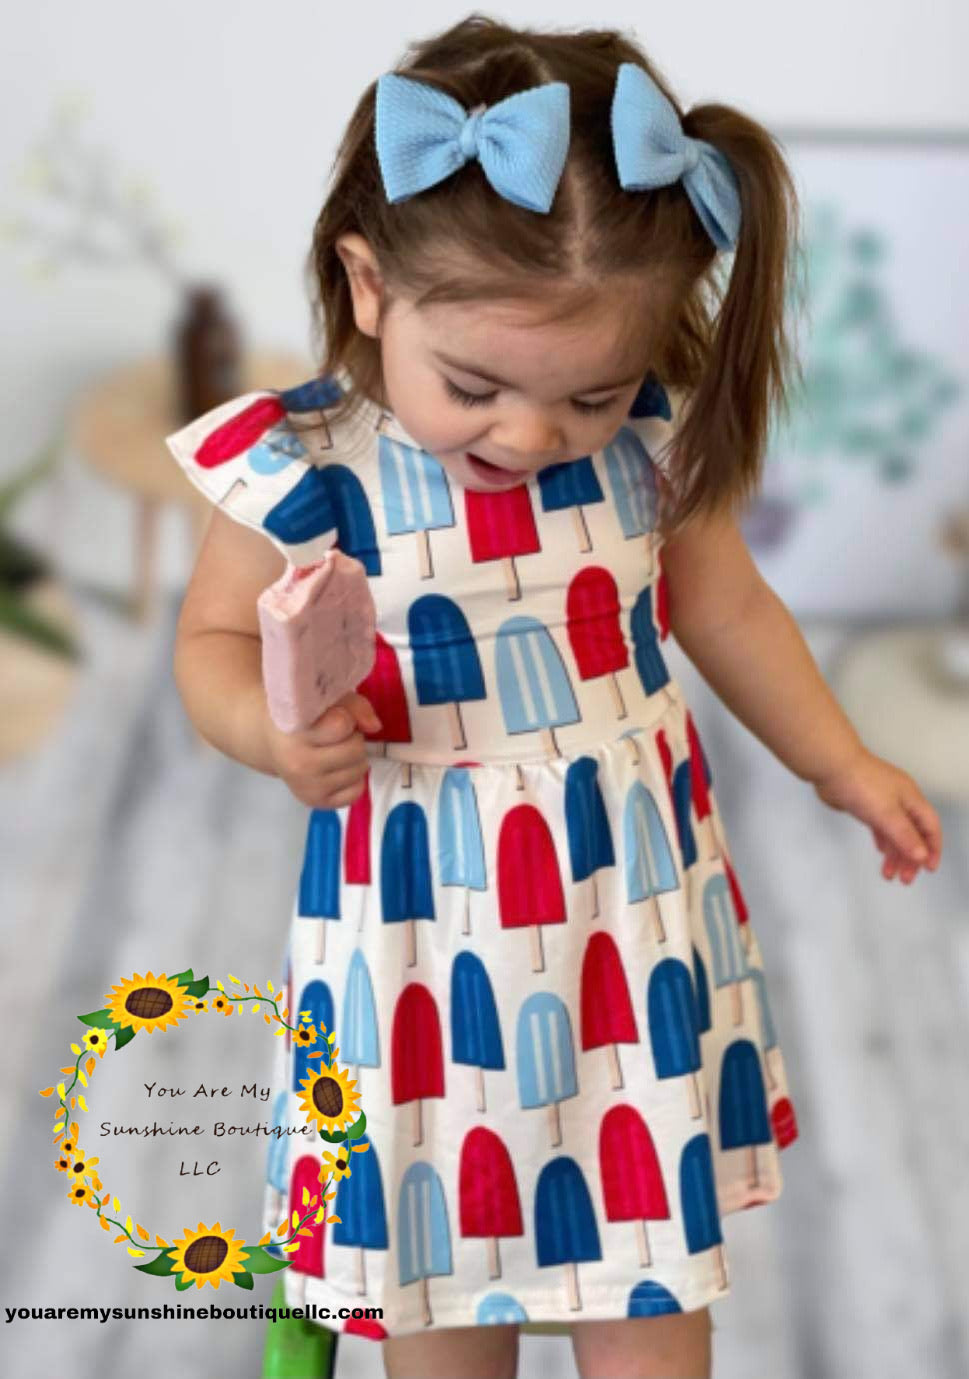 4th of July, Red, white and blue popsicles dress